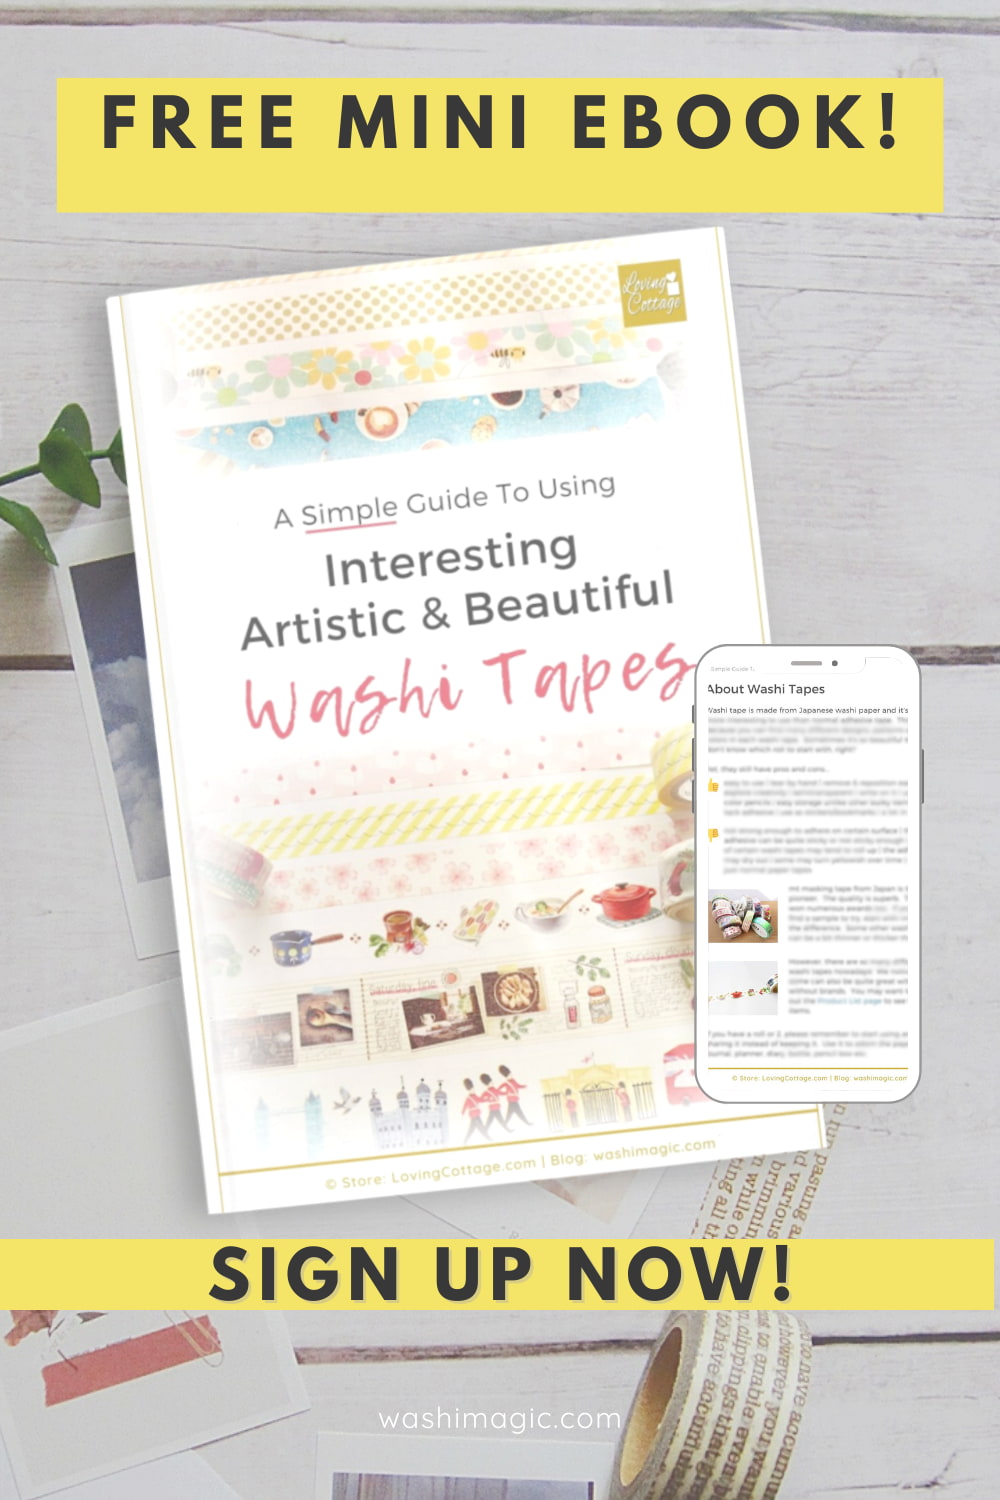 Free mini ebook - A simple guide to using interesting, artistic and beautiful washi tapes - available in the free resources library | Freebie | Washi tape uses | Easy washi tape crafts | Washimagic.com